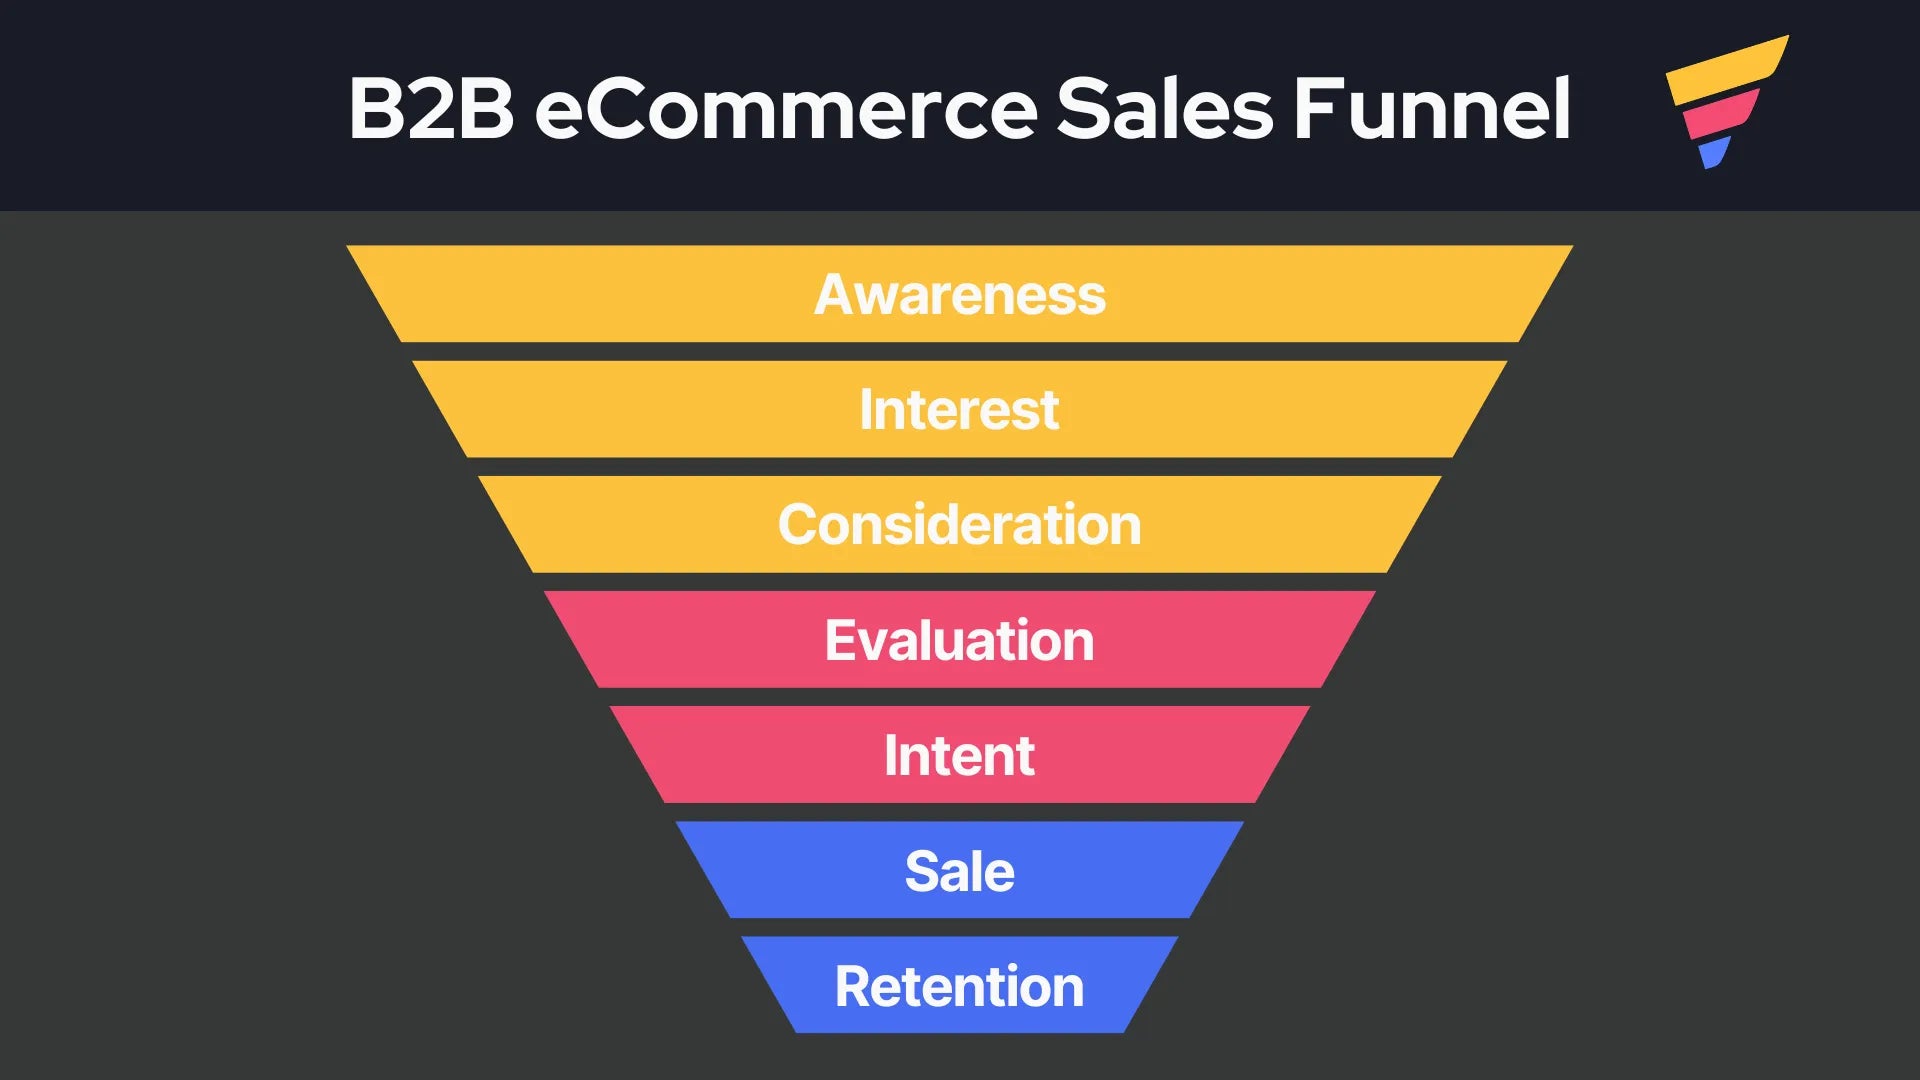 Graphical presentation of the B2B eCommerce Sales Funnel